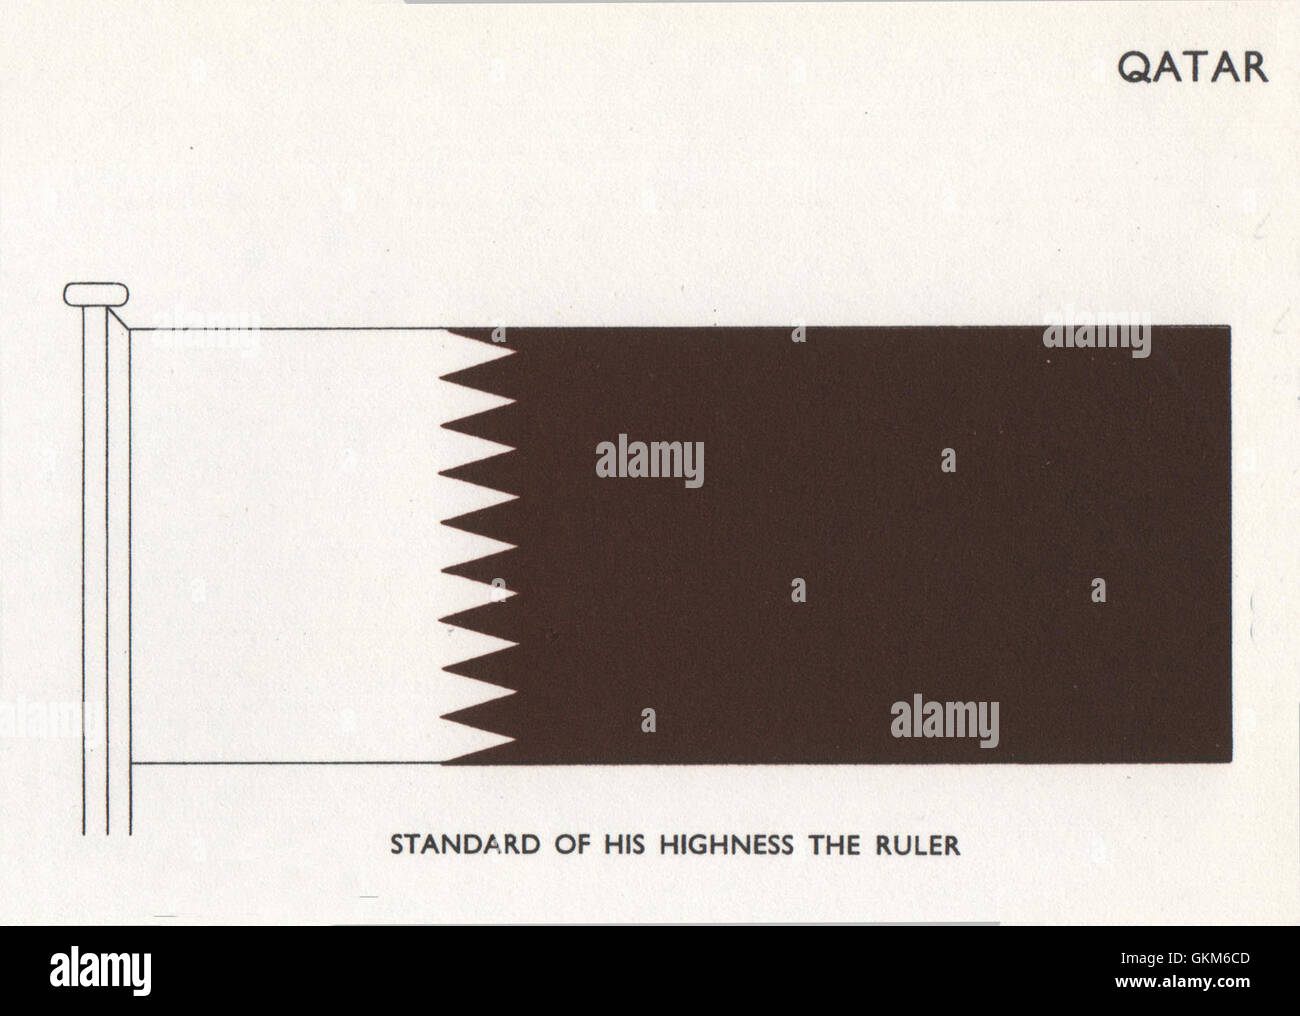 QATAR FLAGS. Standard of his Highness the Ruler, vintage print 1958 Stock Photo